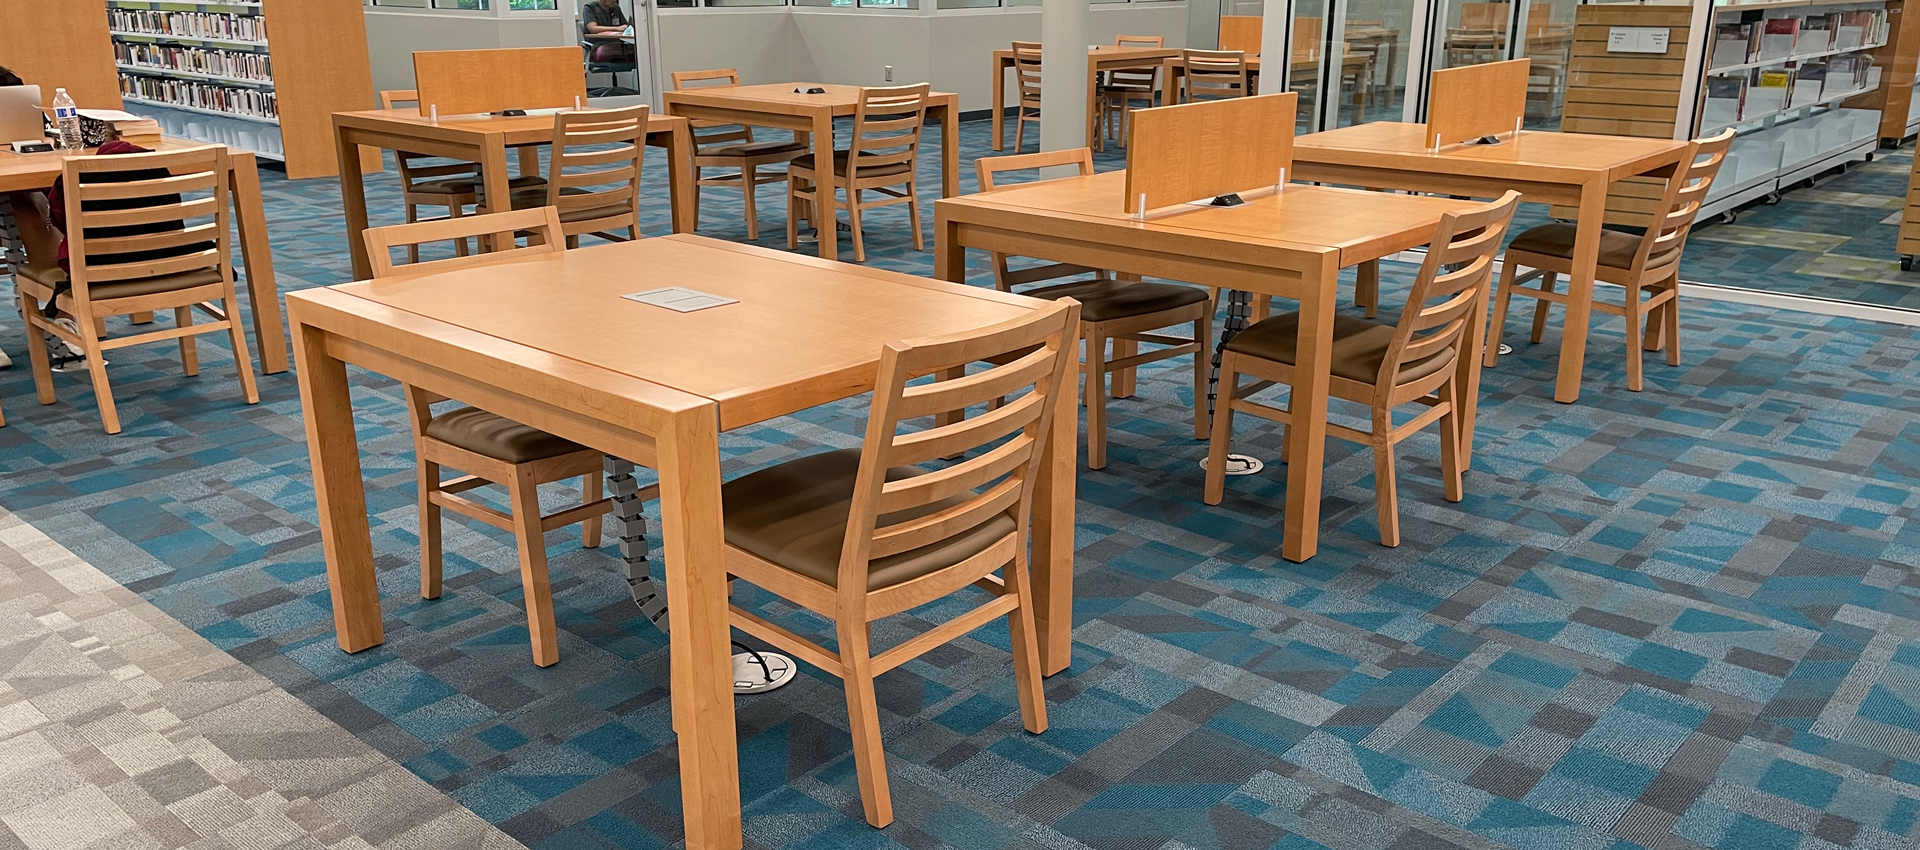 Contemporary wood study tables, with matching chairs for libraries